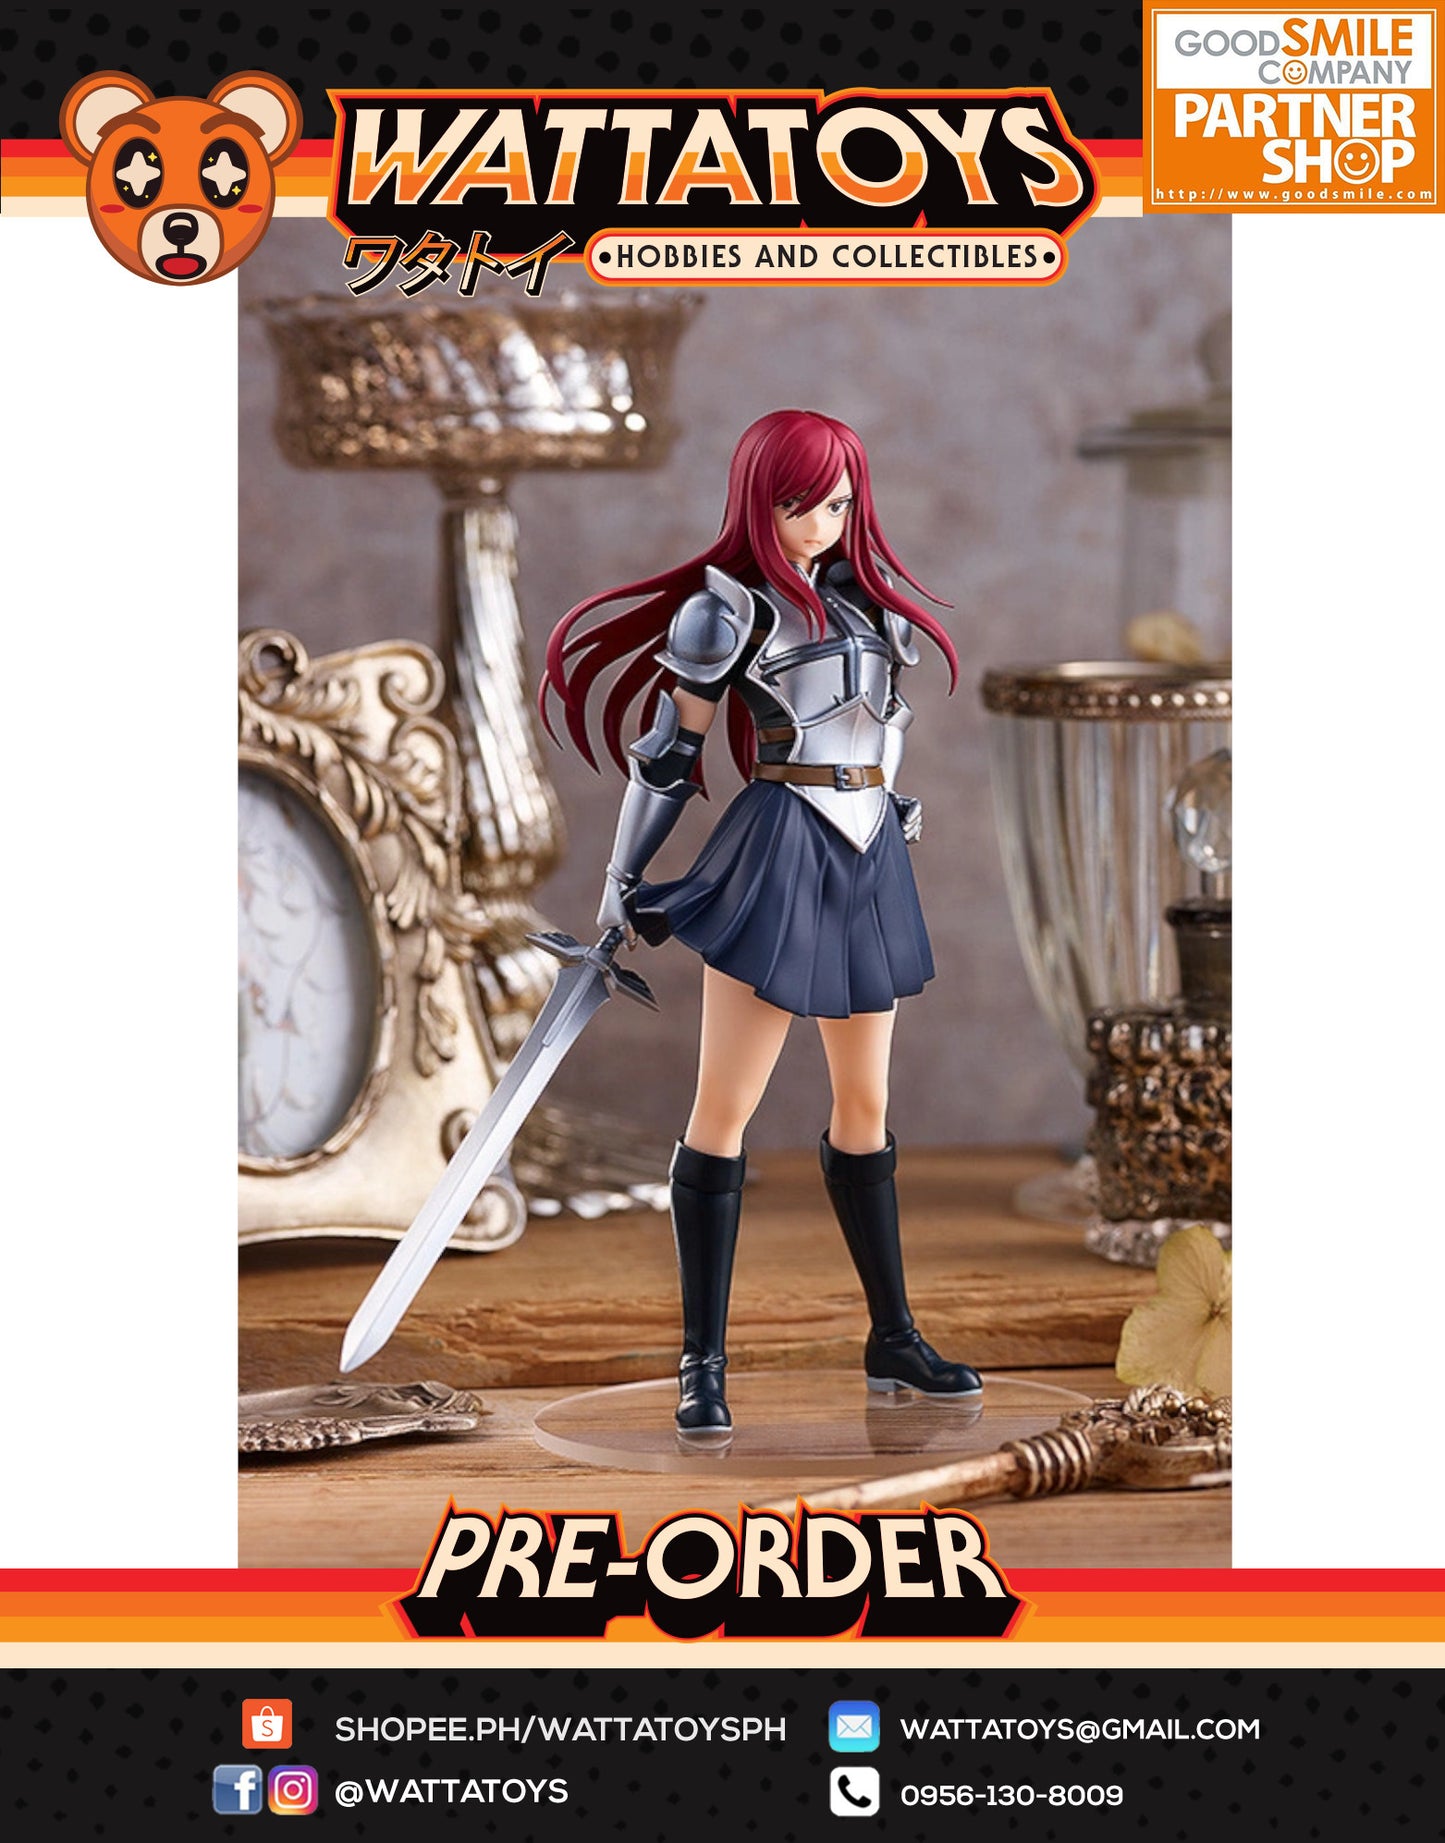 PRE ORDER POP UP Parade Fairy Tail - Erza Scarlet